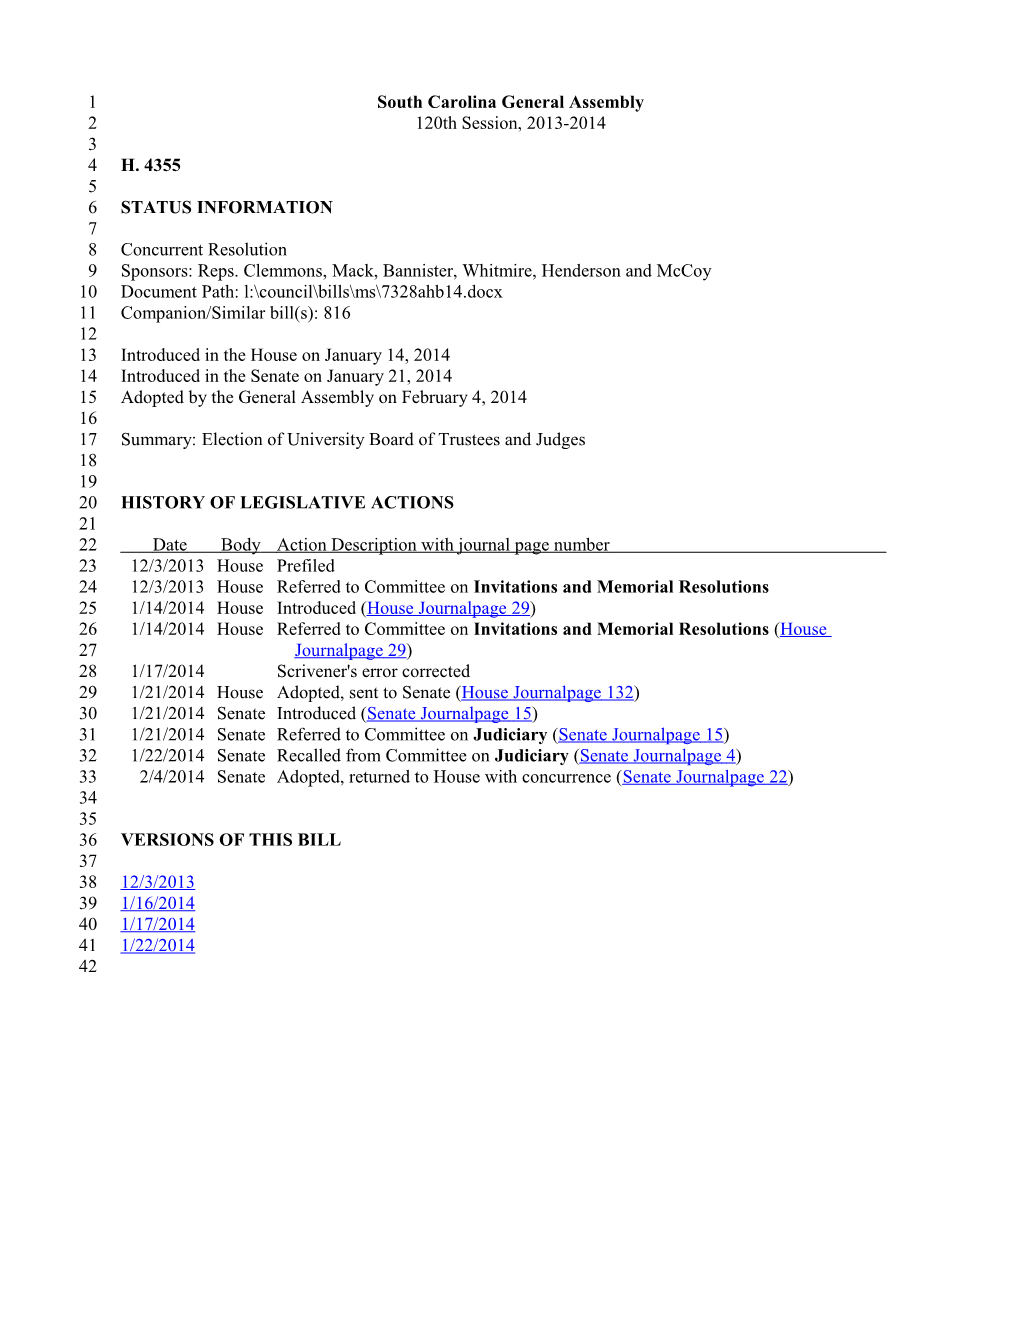 2013-2014 Bill 4355: Election of University Board of Trustees and Judges - South Carolina